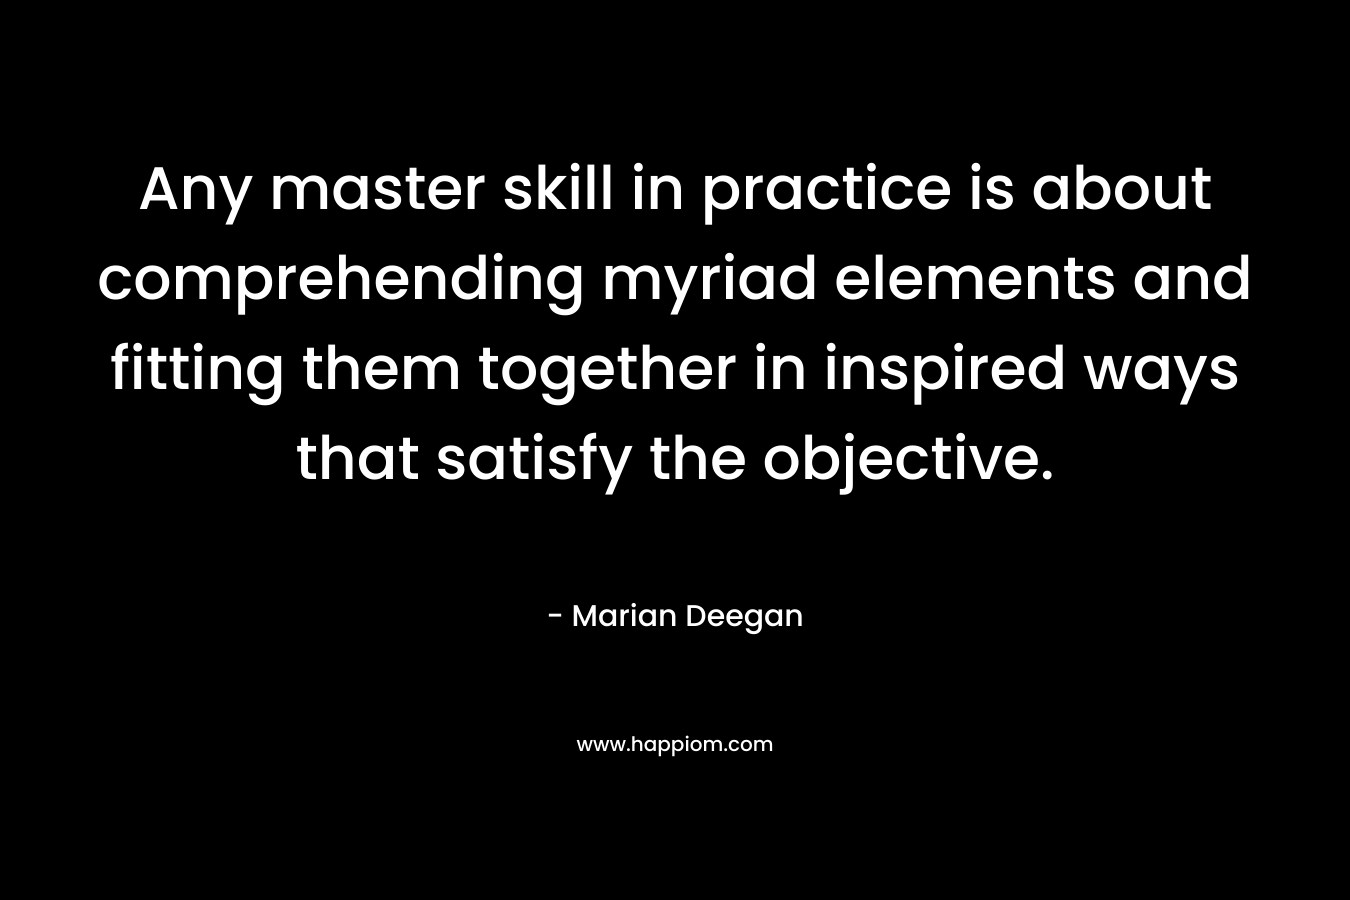 Any master skill in practice is about comprehending myriad elements and fitting them together in inspired ways that satisfy the objective. – Marian Deegan